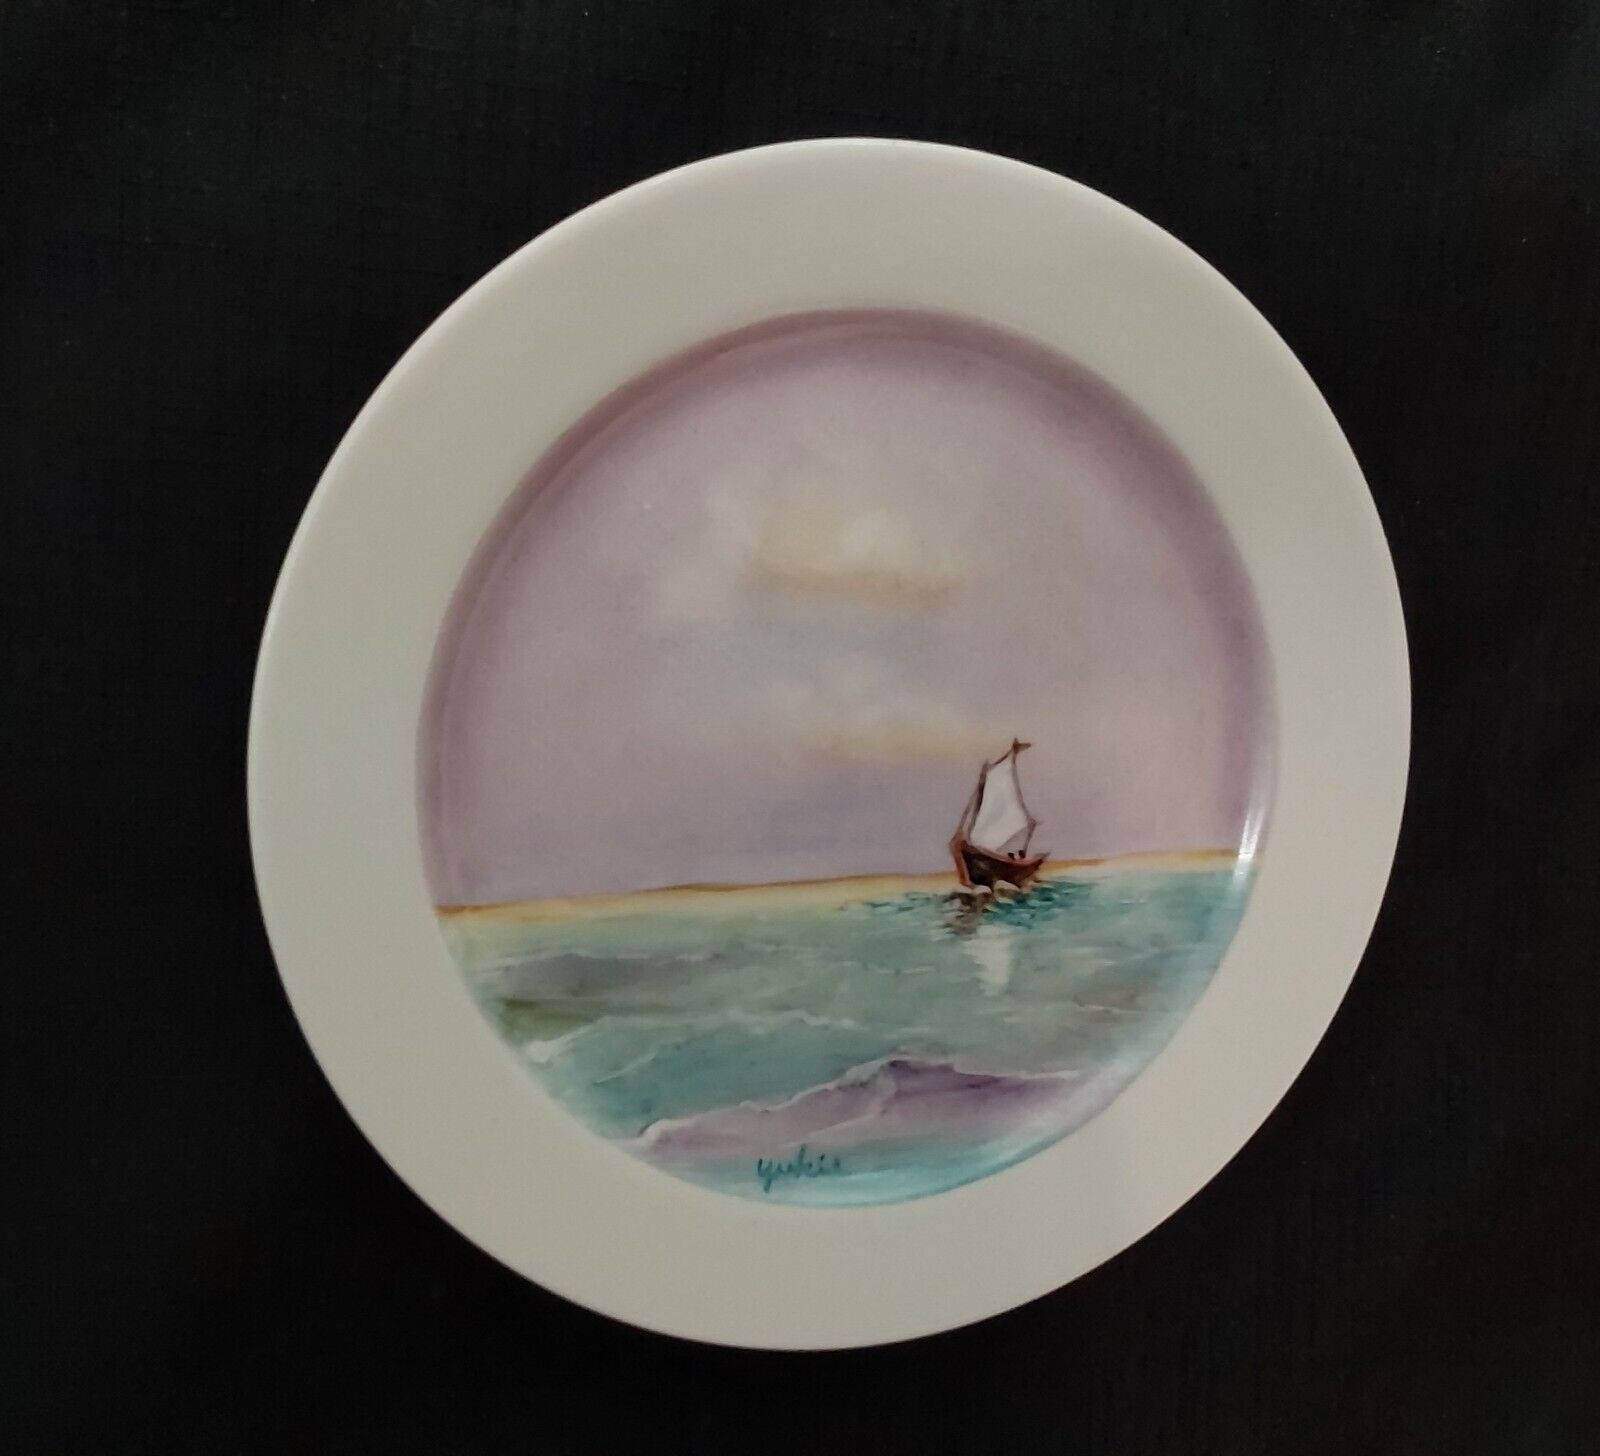 YUKIE - Antique English Porcelain Boats River Plate Hand Painted & Signed C.1890